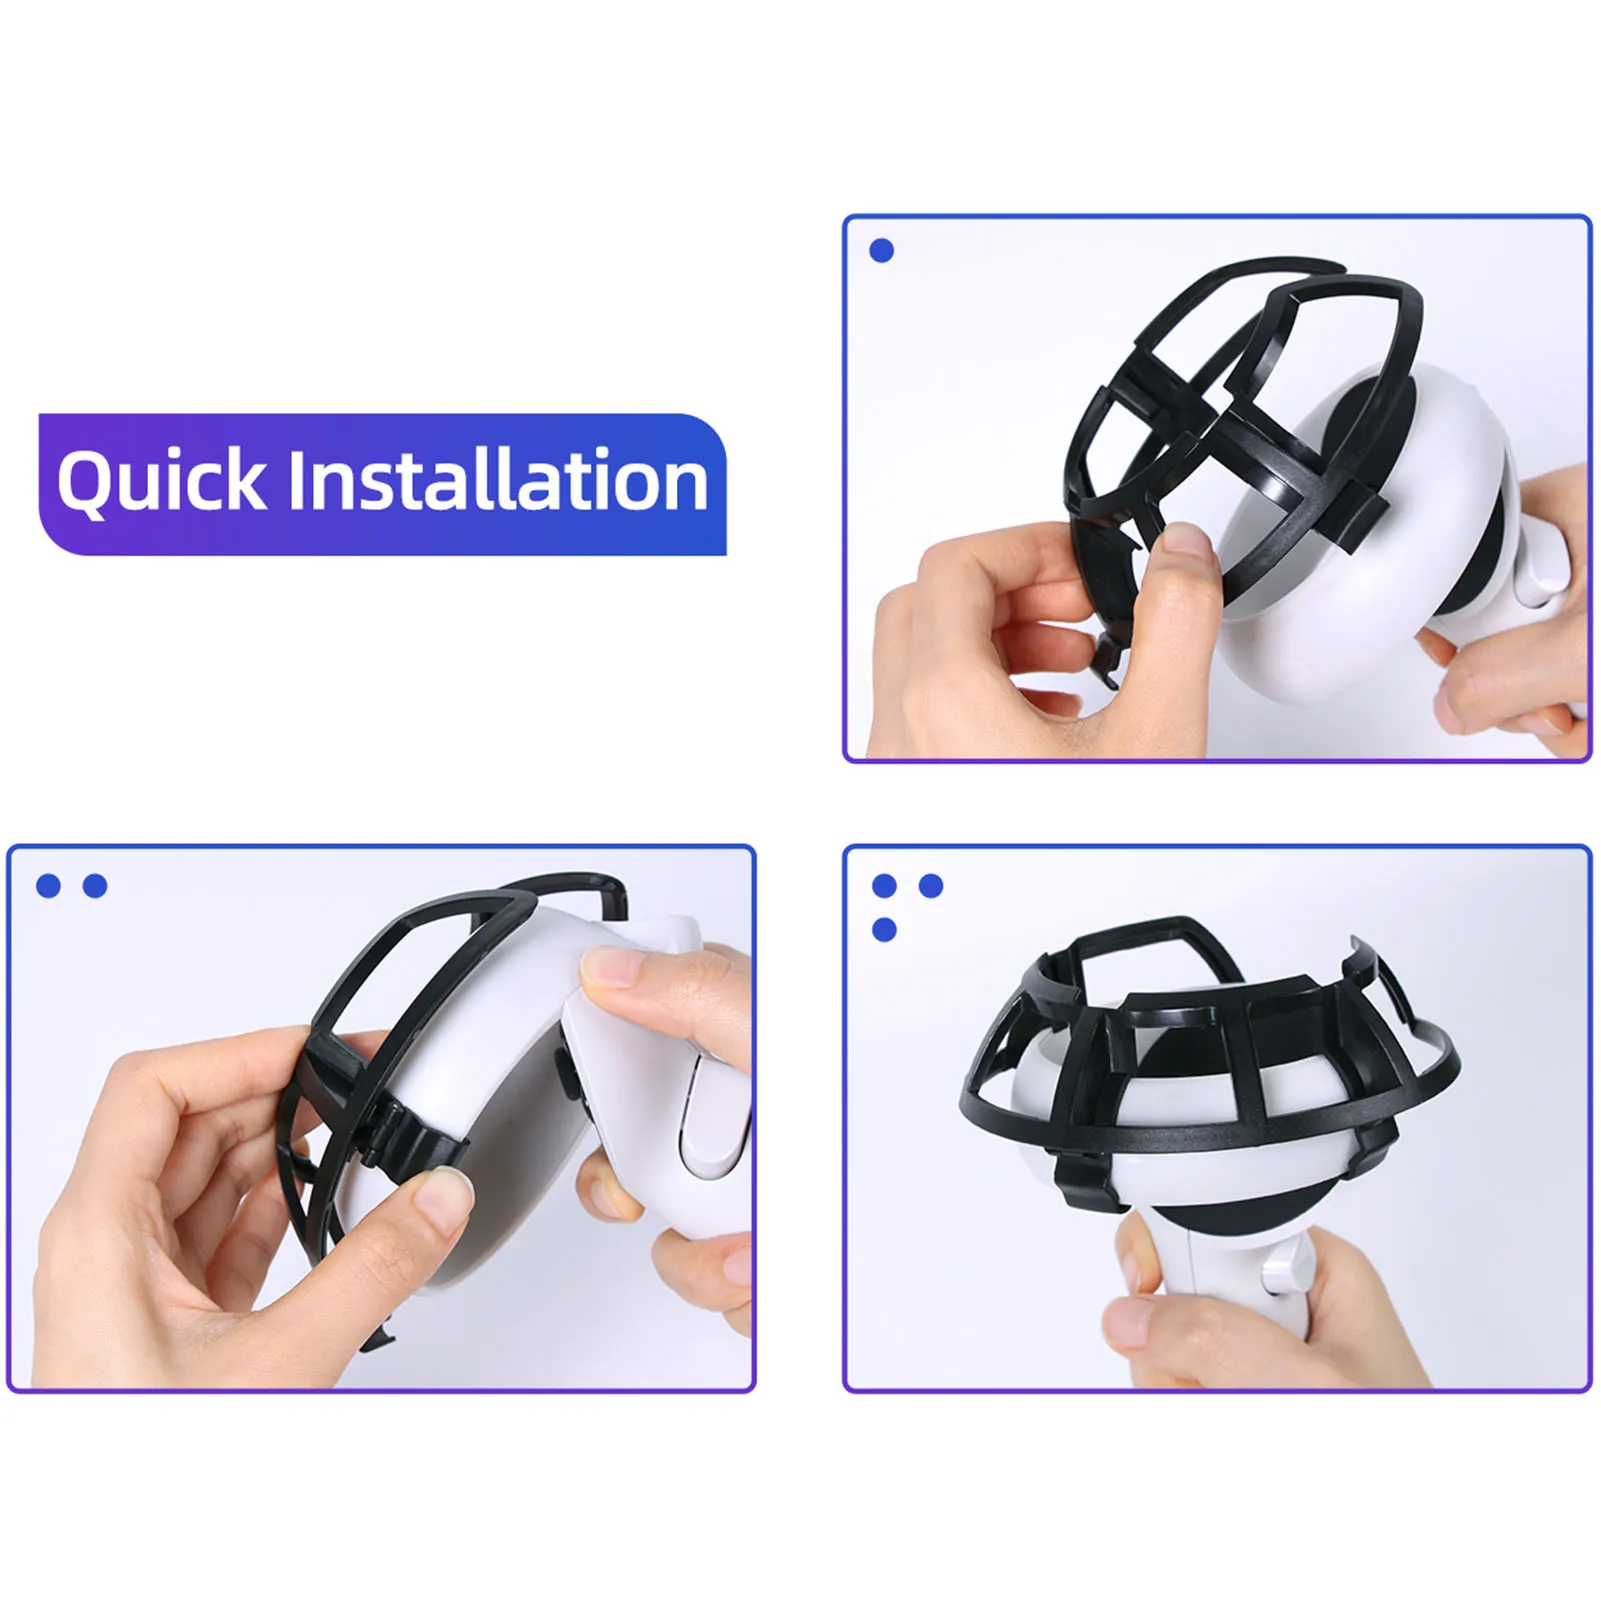 1 Pair Anti-Collision VR Controller Ring Bumper Frame Cover for Oculus Quest 2 Grip Handle Protective Accessories		                        1 Pair Anti-Collision VR Controller Ring Bumper Frame Cover for Oculus Quest 2 Grip Handle Protective Accessories